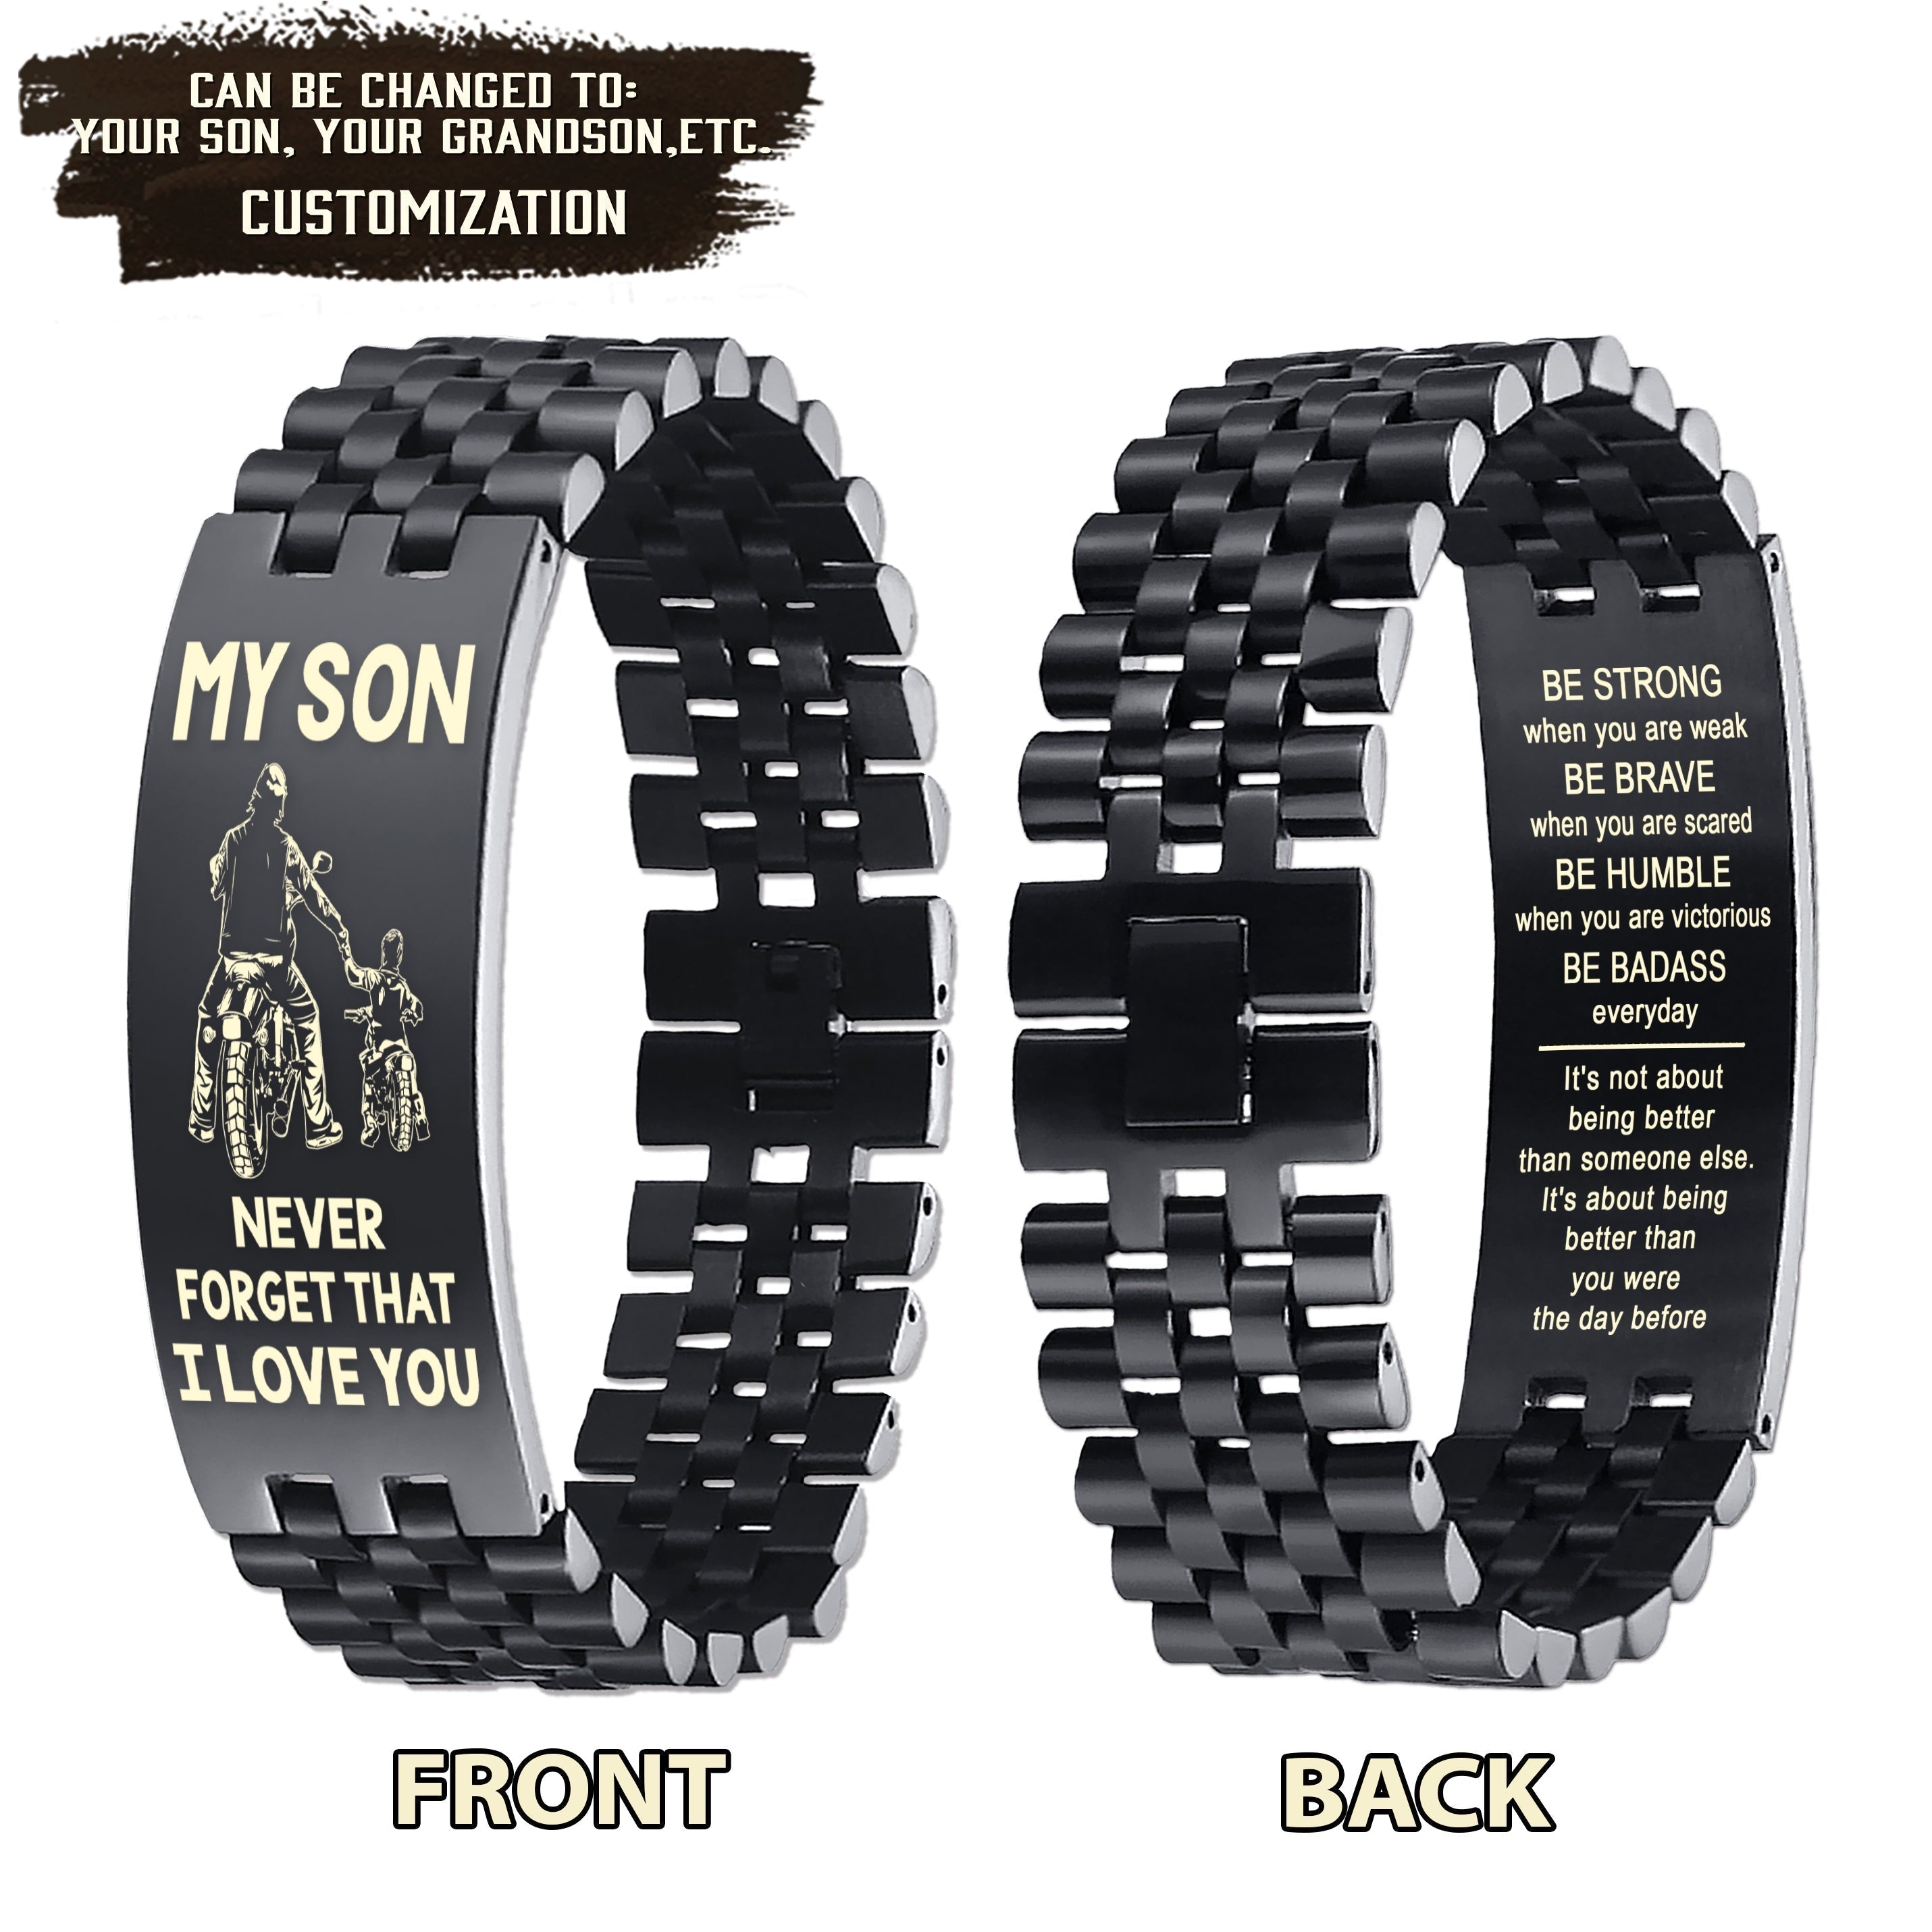 Biker engraved double sided dog tag bracelet dad to son, It is not about better than someone else, It is about being better than you were the day before, Be strong be brave be humble